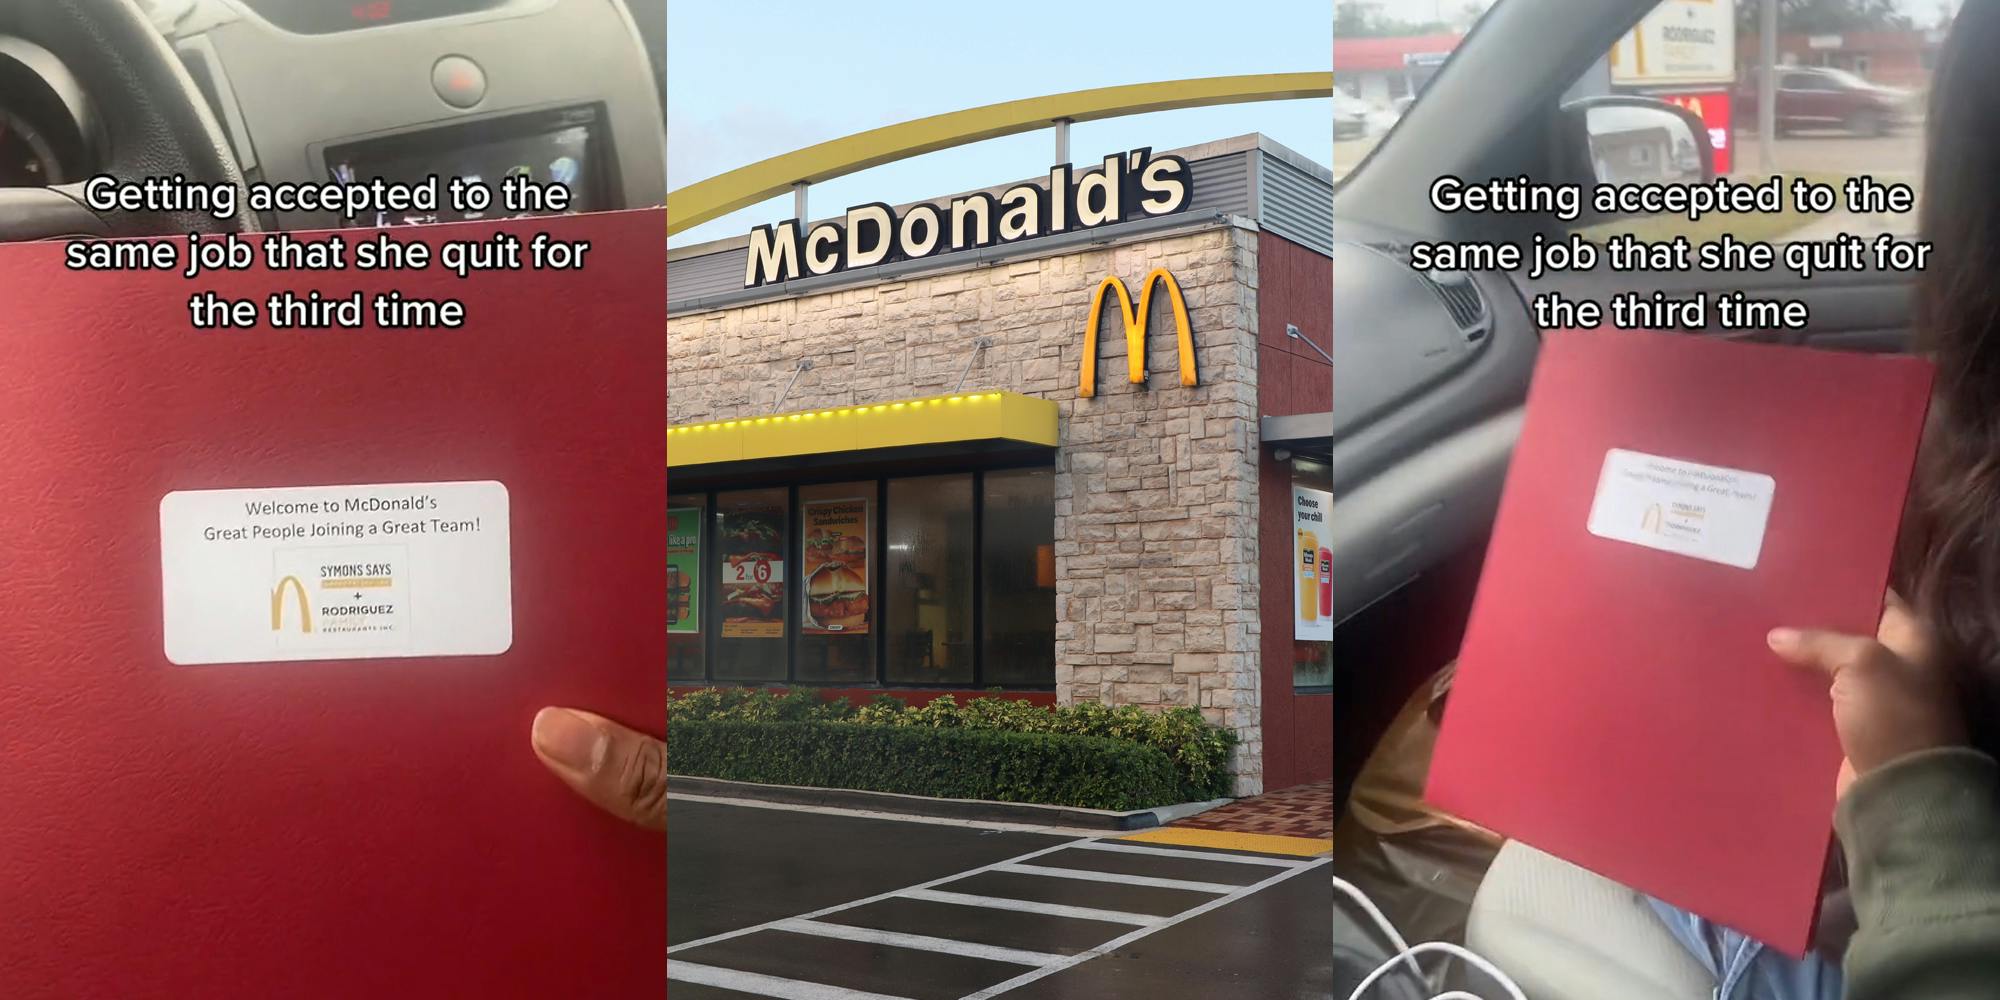 person holding McDonald's folder in car caption "Getting accepted to the same job she quit for the third time" (l) McDonald's signs on building (c) person holding McDonald's folder up to passenger in car caption "Getting accepted to the same job that she quit for the third time" (r)